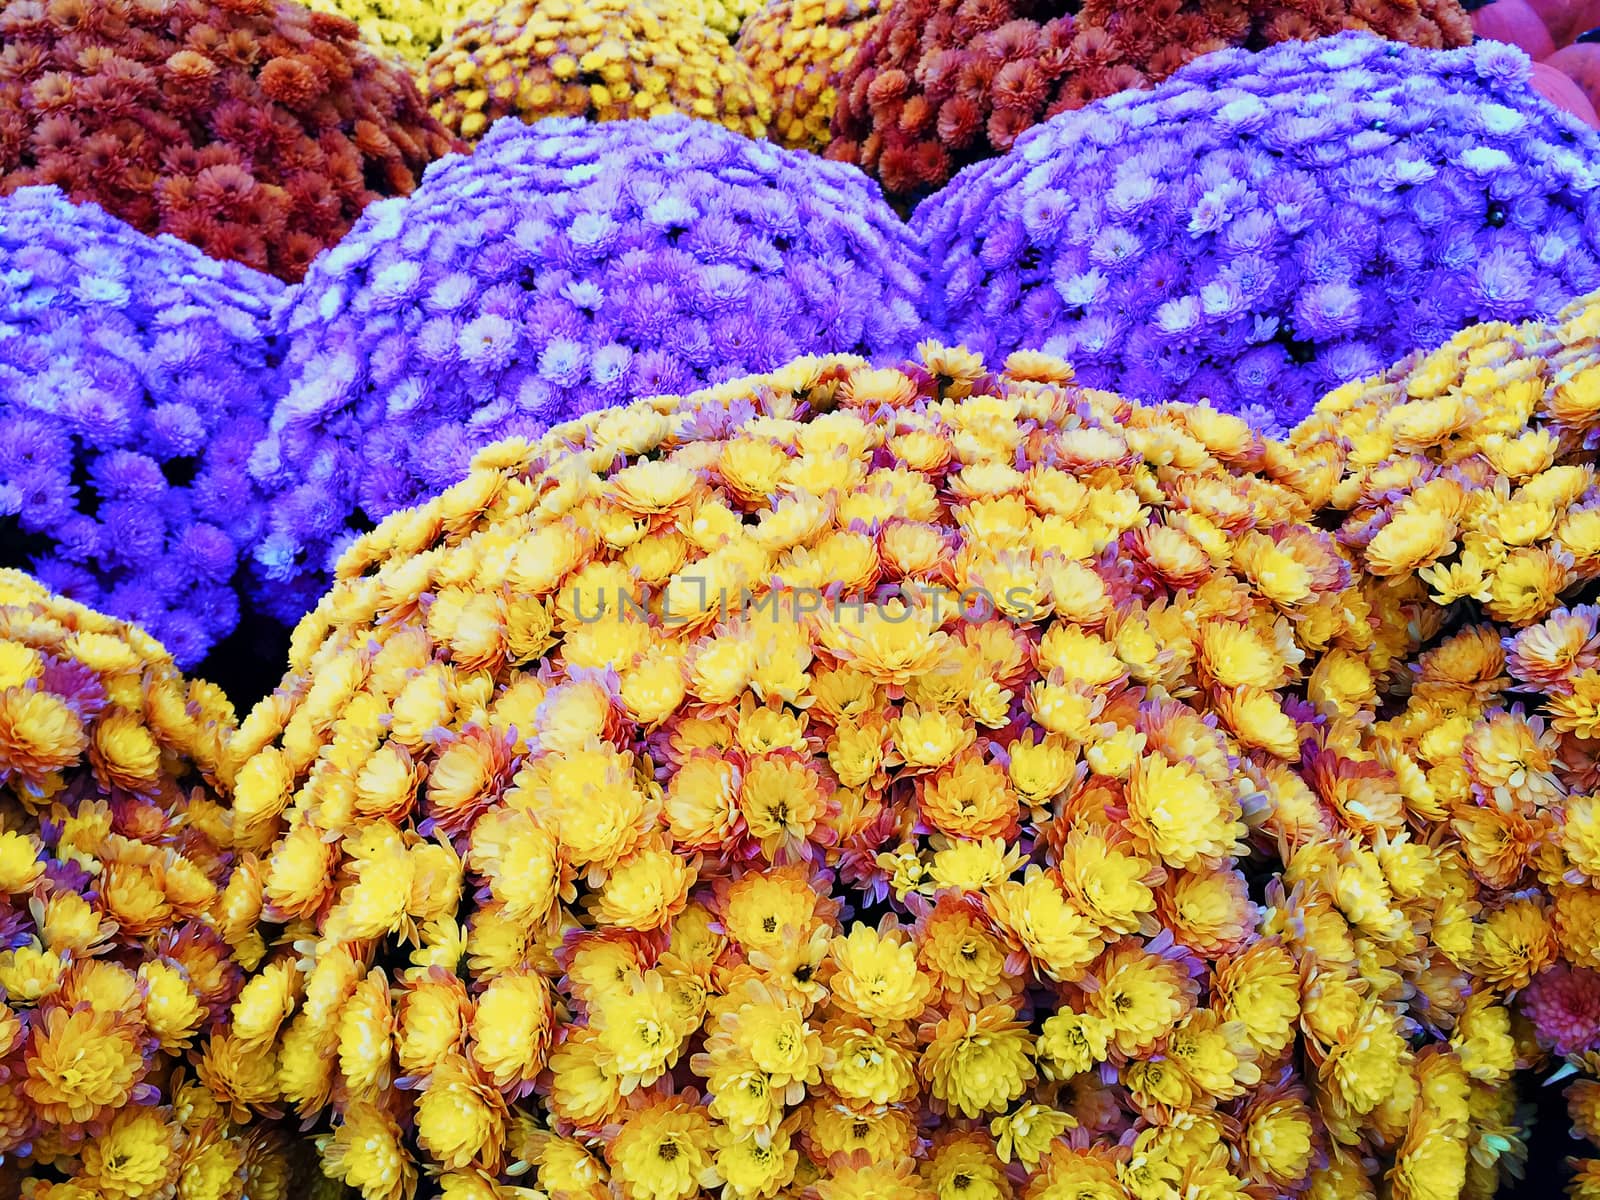 Marketplace with colorful autumn chrysanthemums. Quebec, Canada.